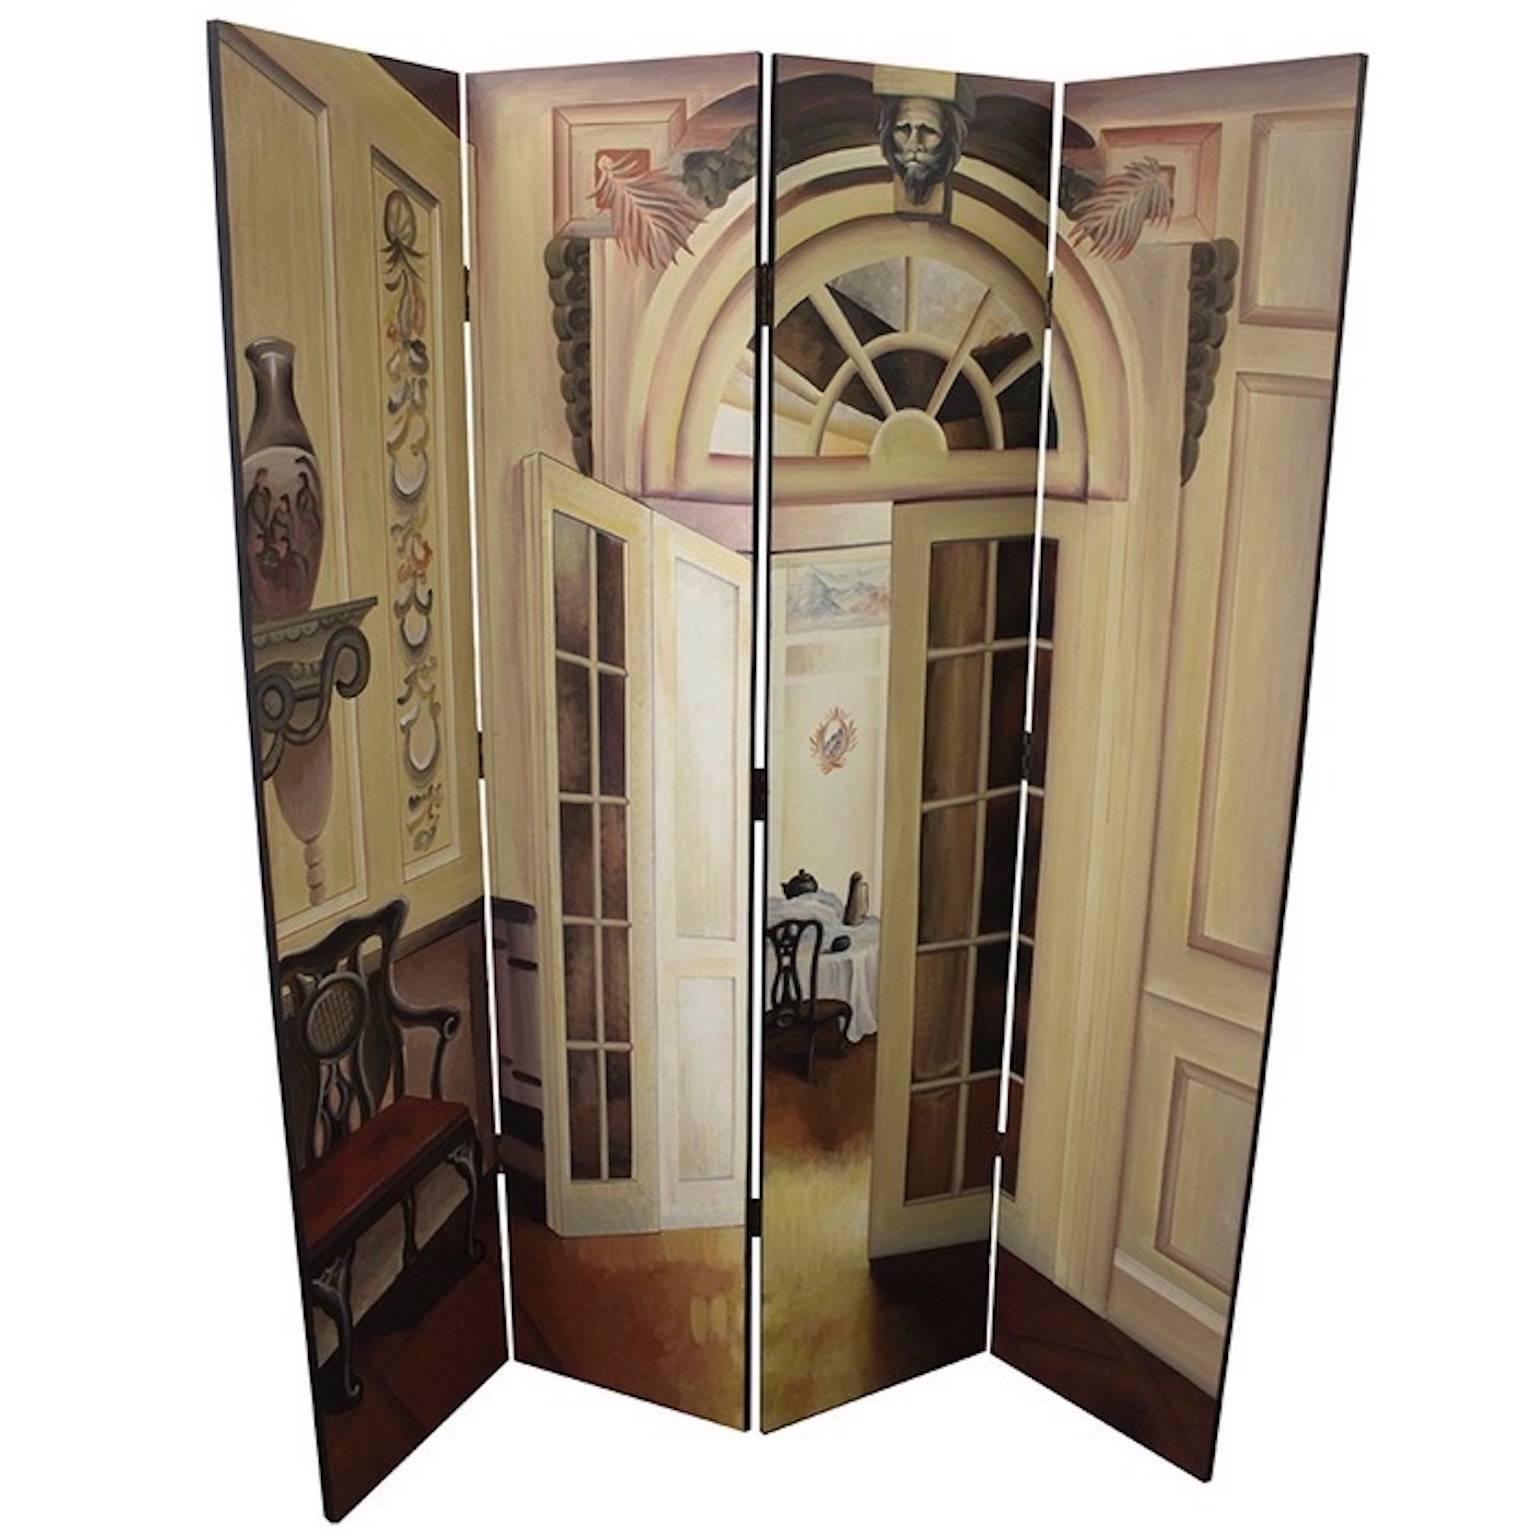 Seven foot tall six foot wide hand-painted four-panel room screen. This trompe-l'oei l screen is painted with imagery of a foyer peeking through glass paned doors into a still life room with architectural elements and classical furnishings. The back